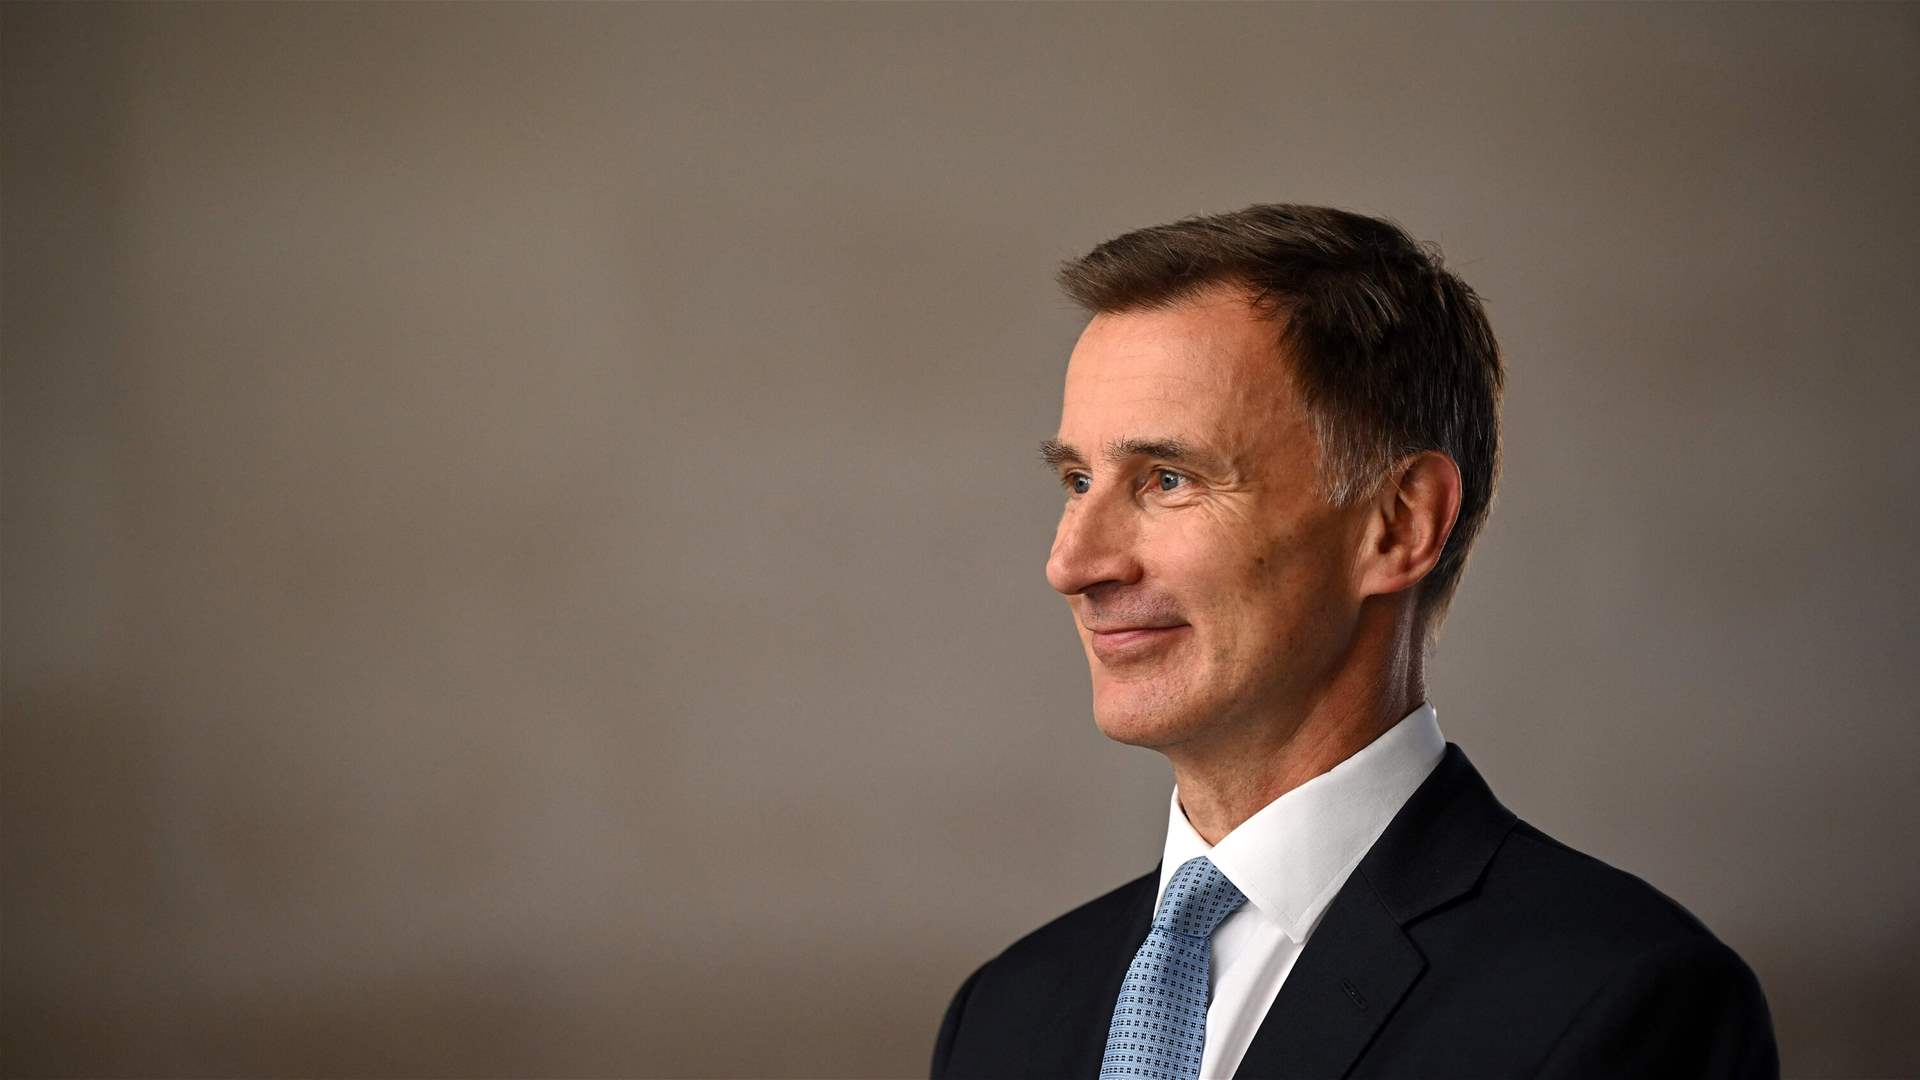 Hunt, hemmed in by debt, set to focus on growth in UK budget